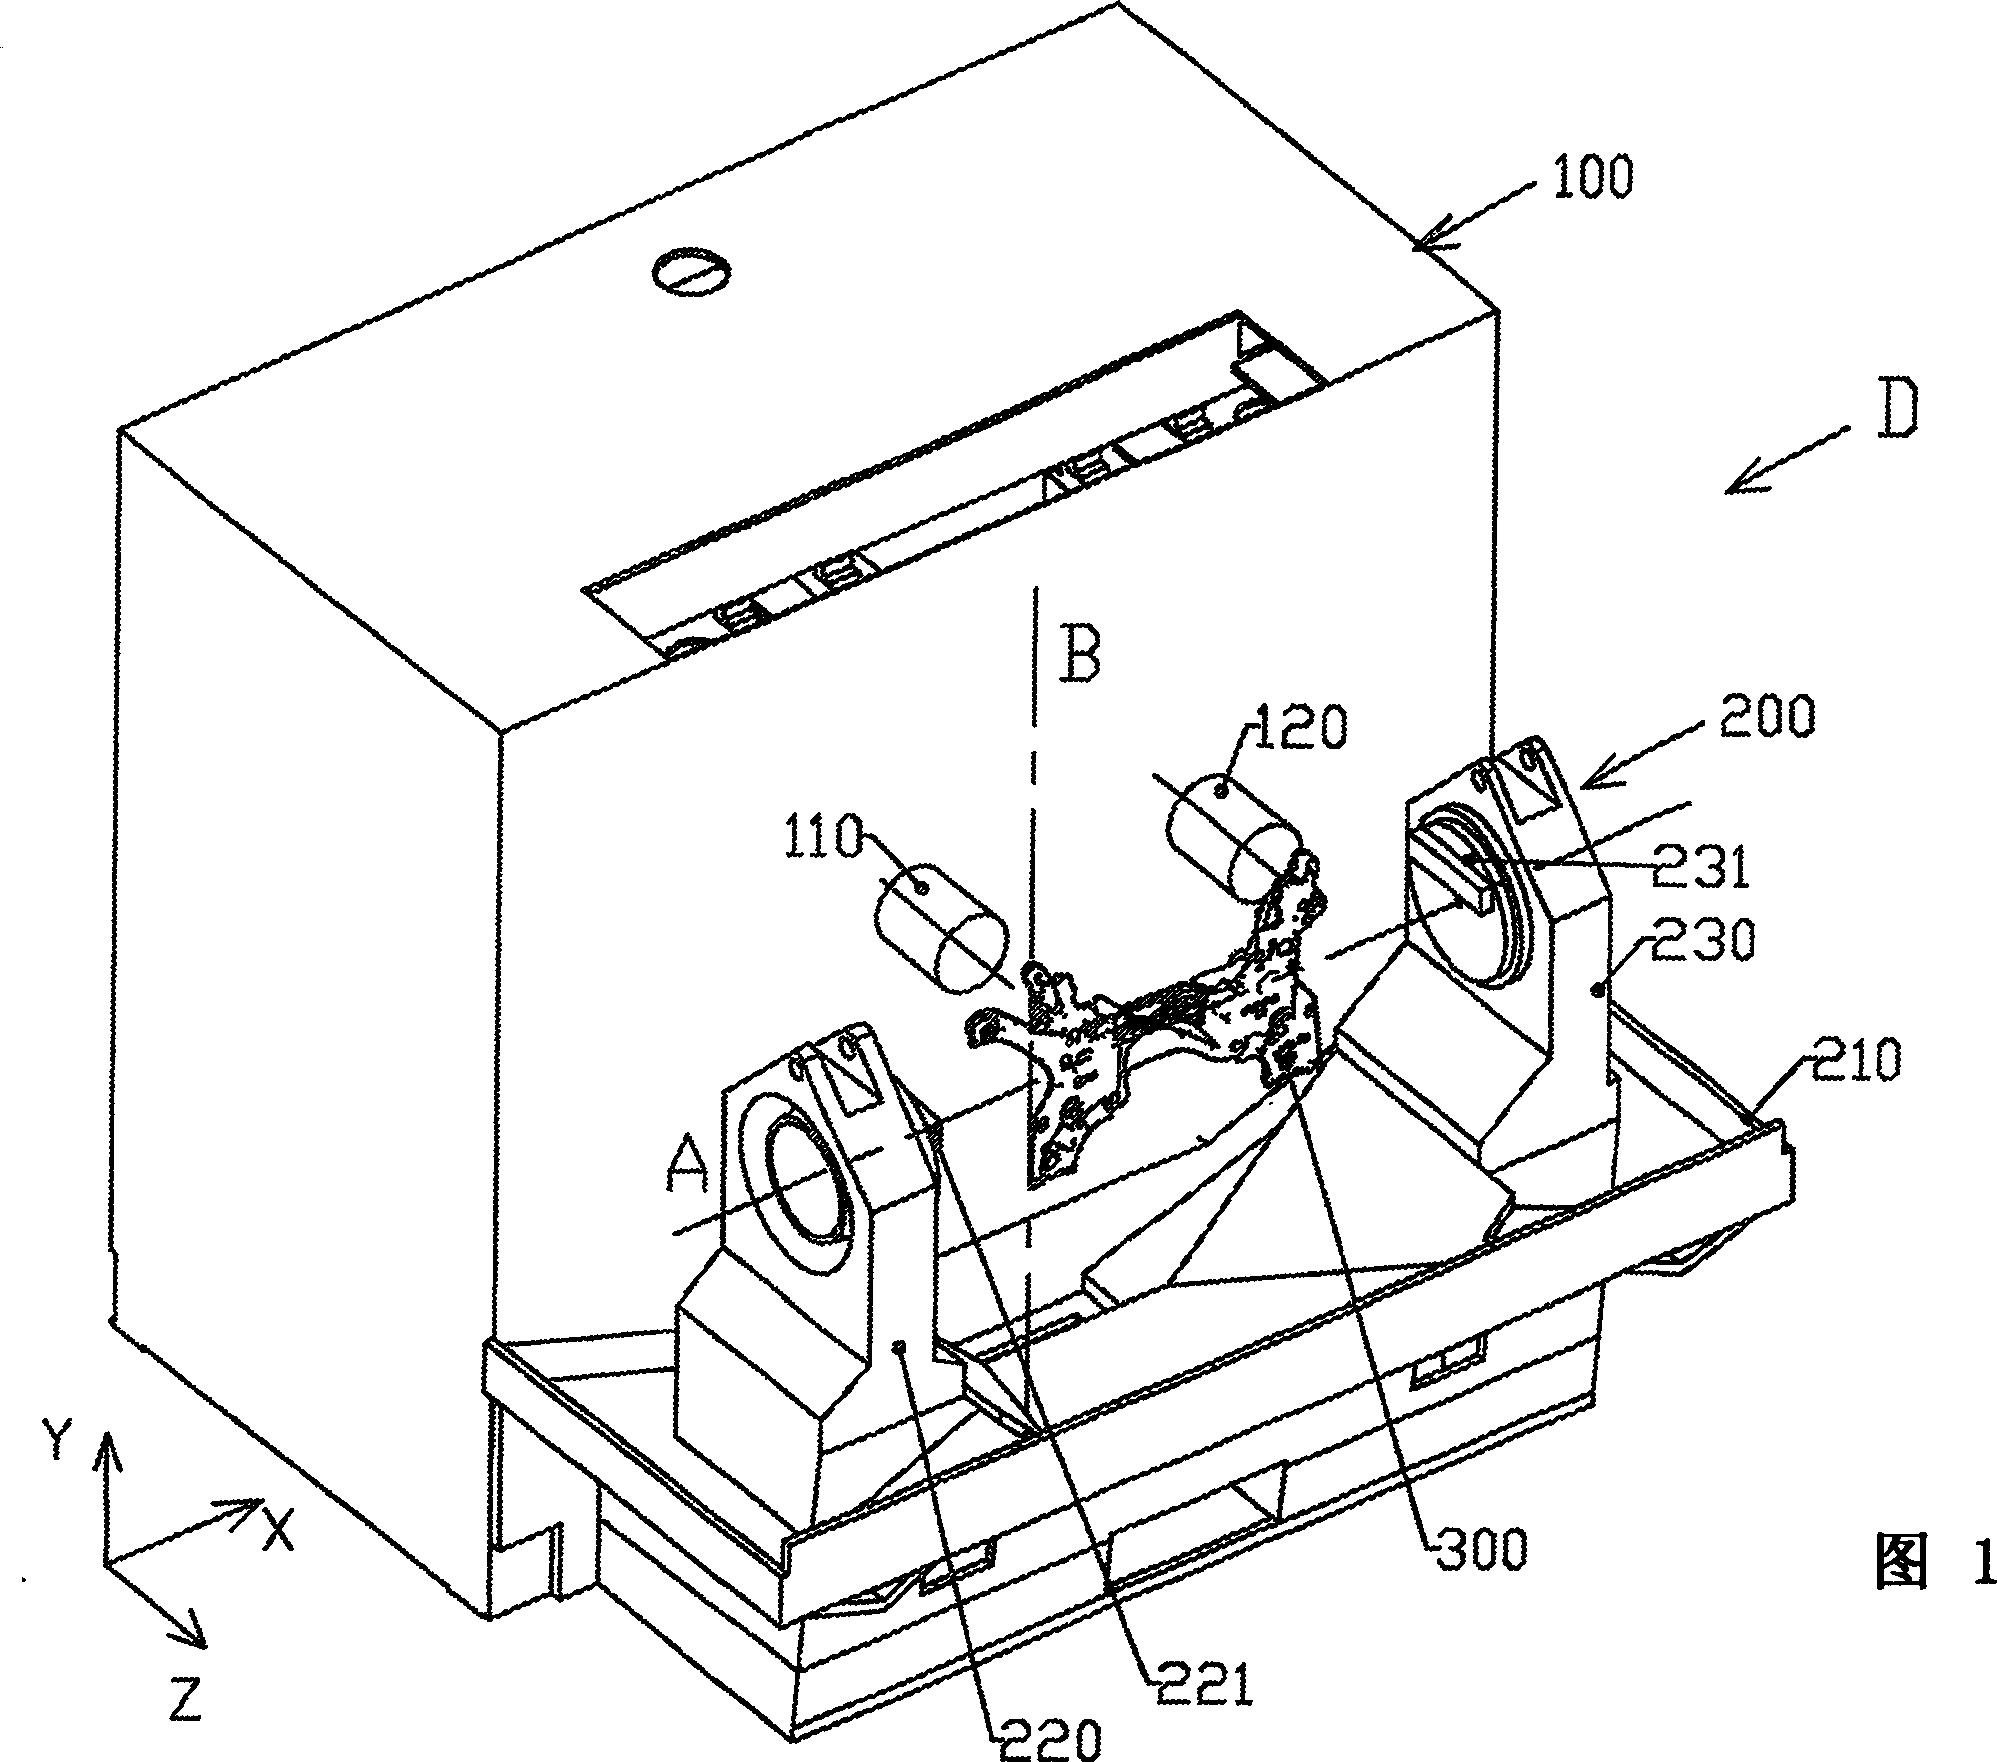 Device and method for machining long workpieces fixed between two rotating bearings